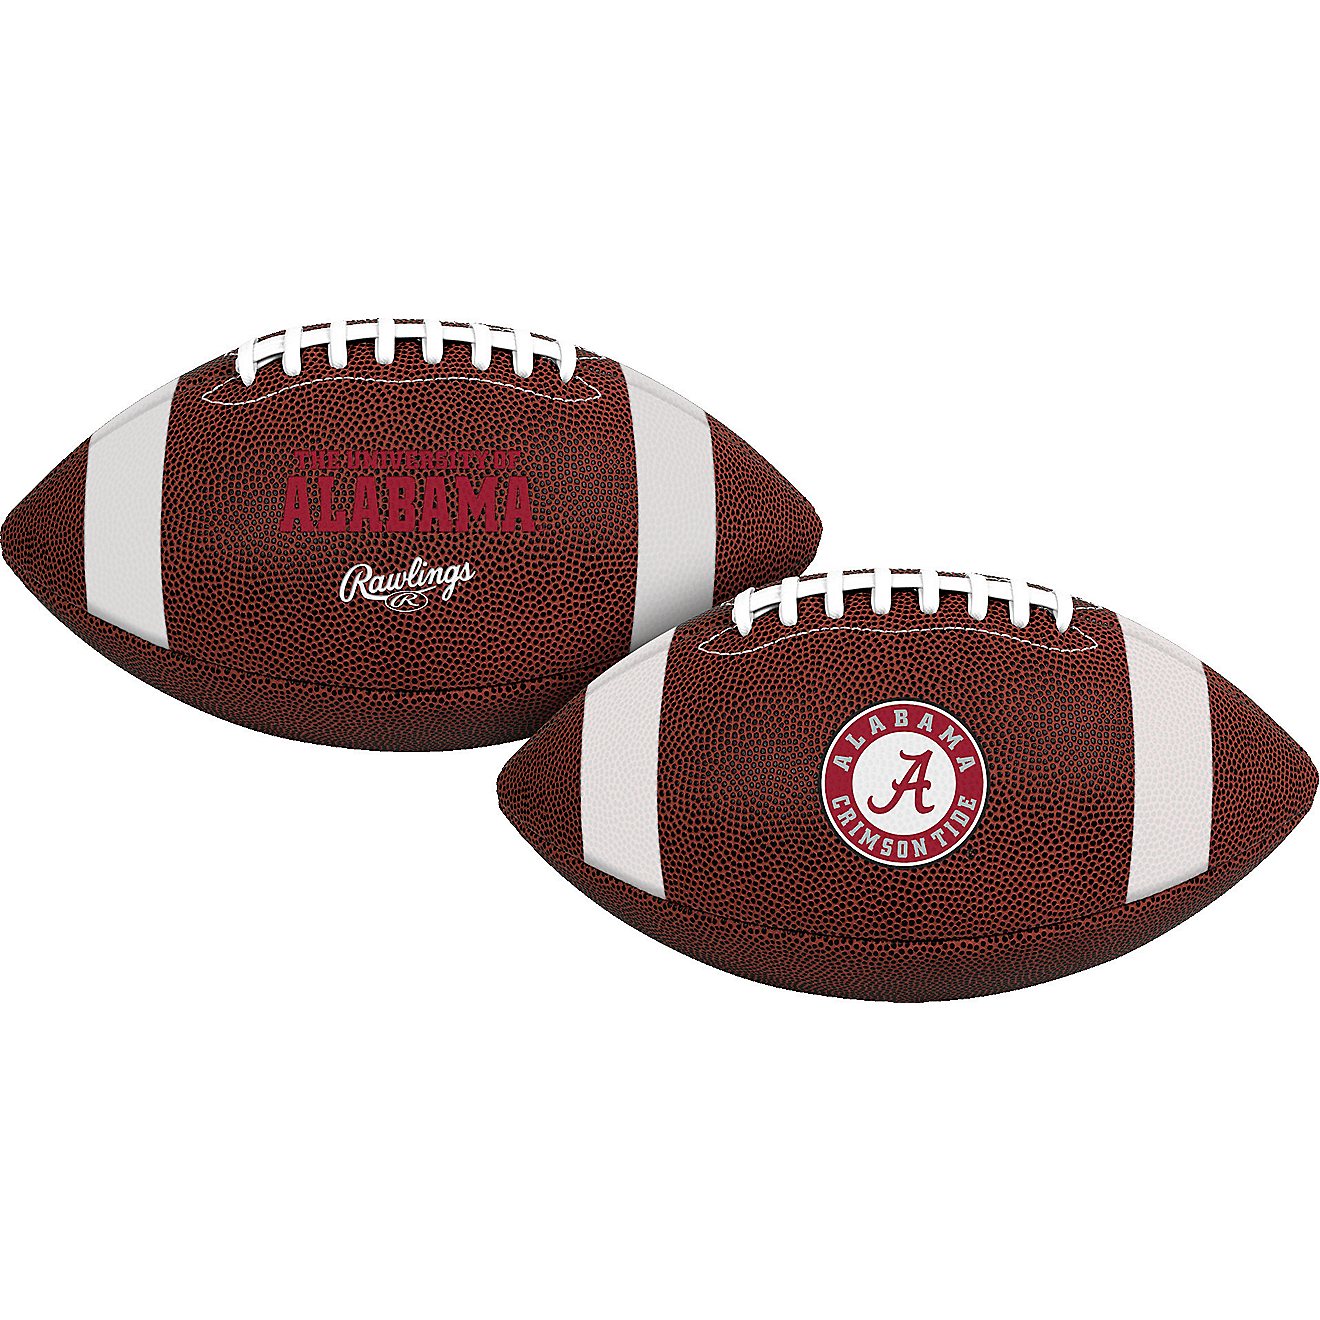 Rawlings University of Alabama Air It Out Youth Football                                                                         - view number 1